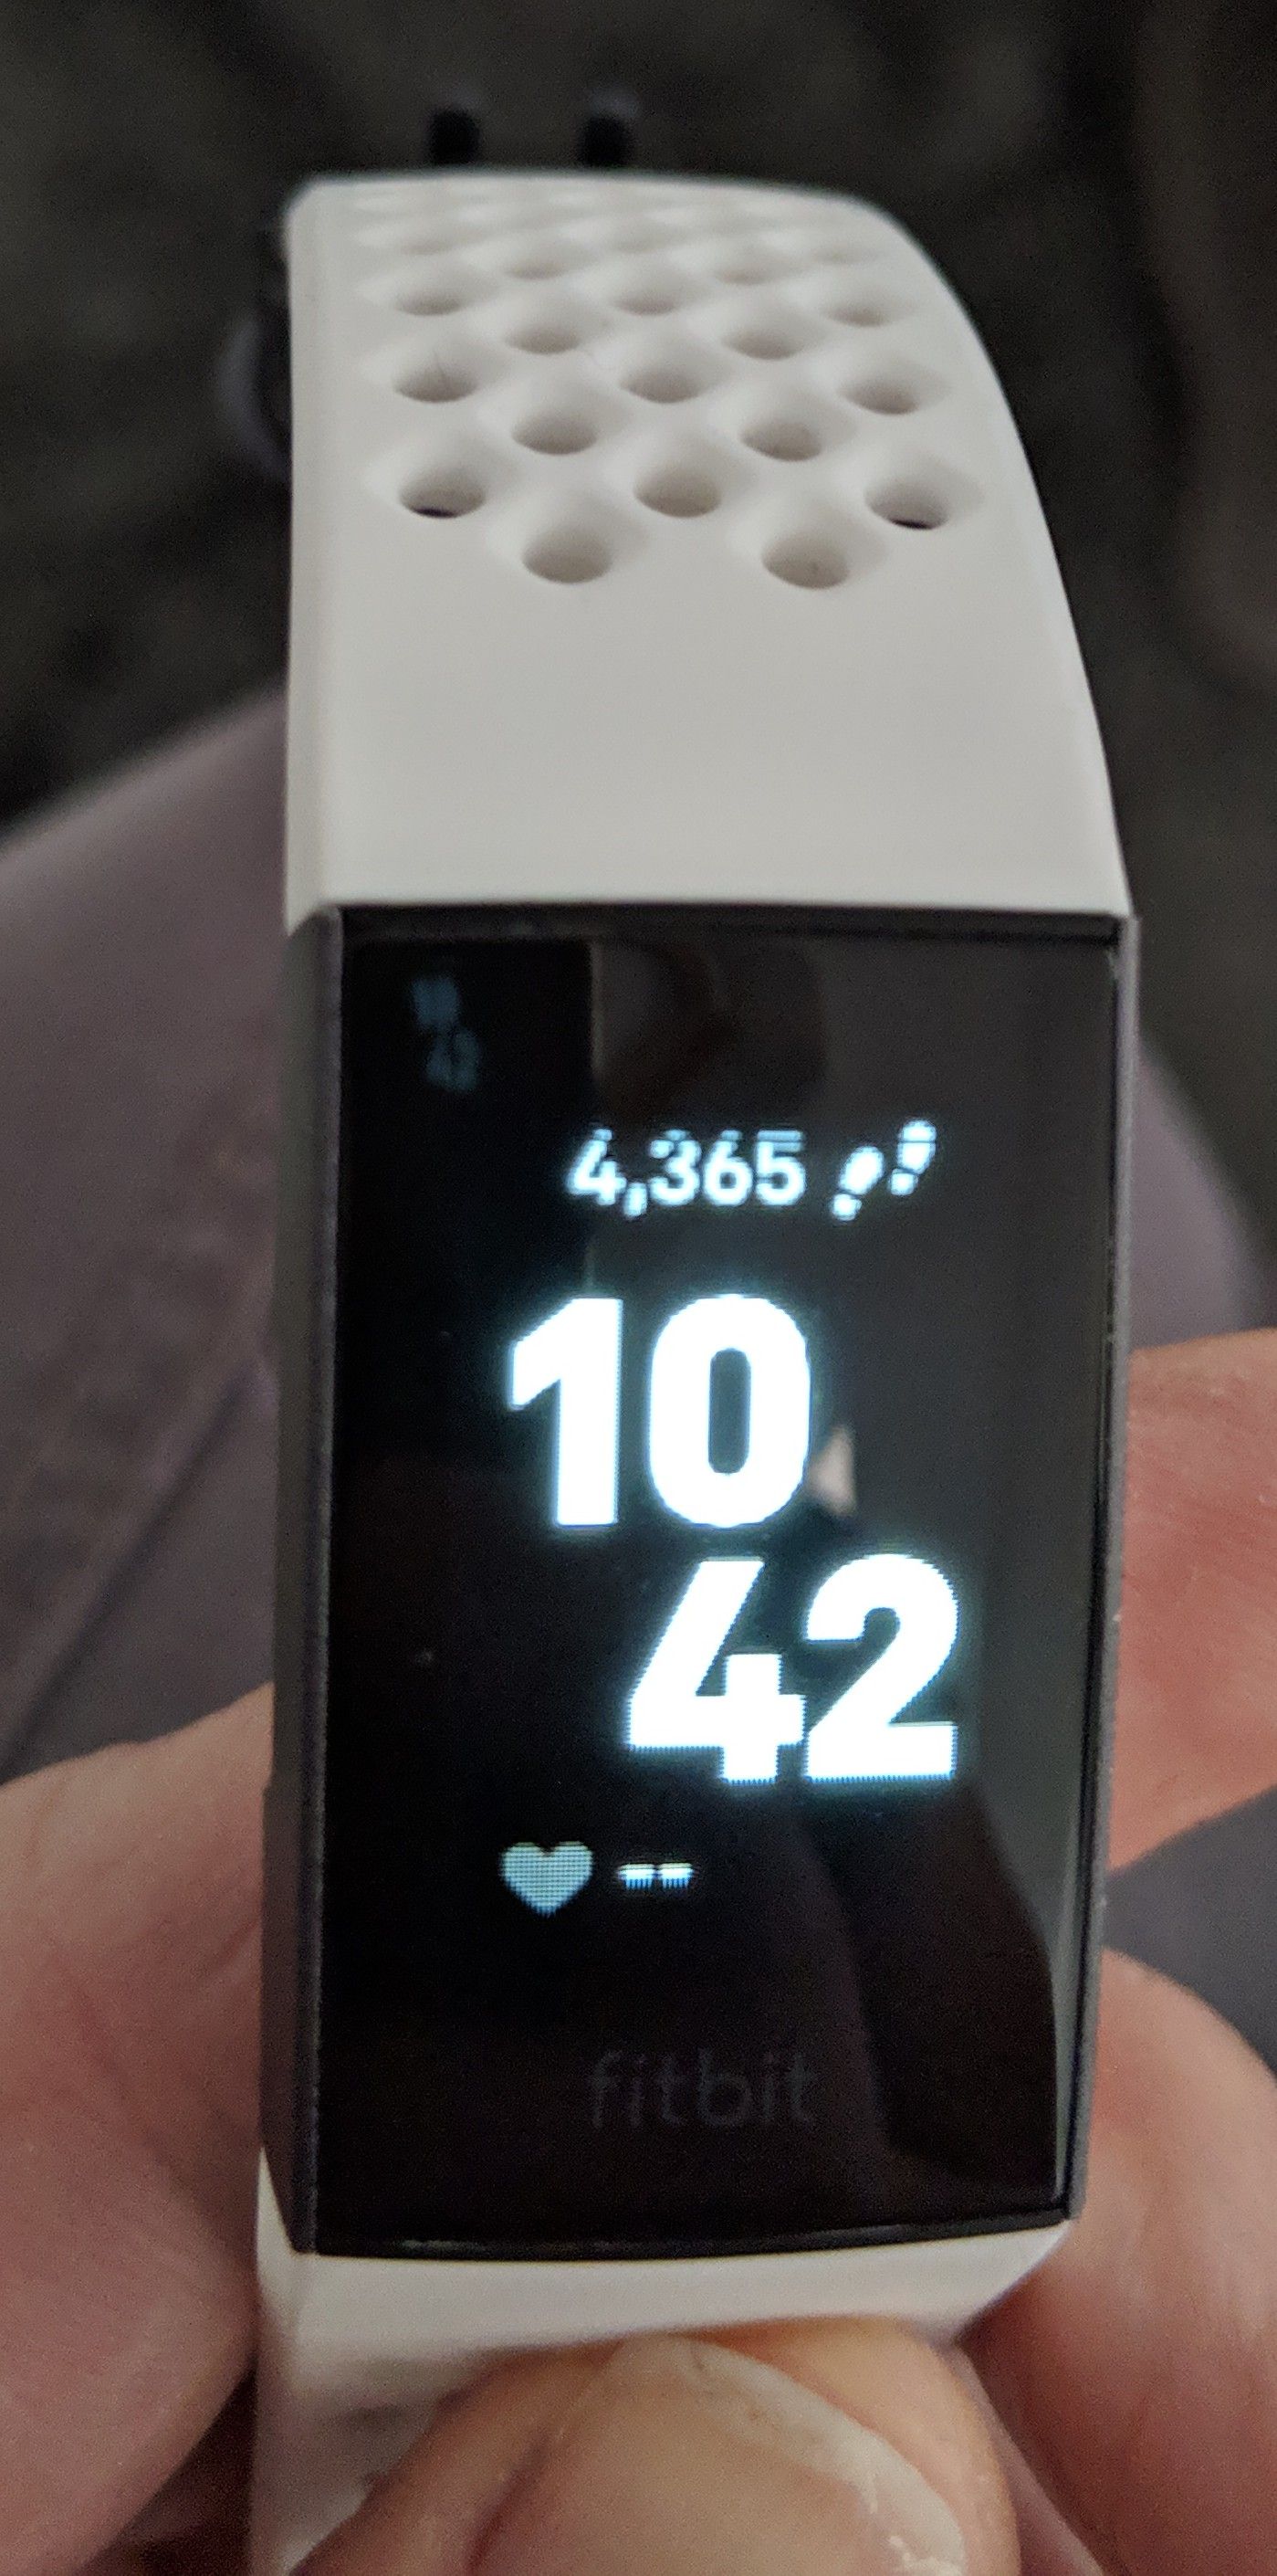 charge 3 fitbit black screen